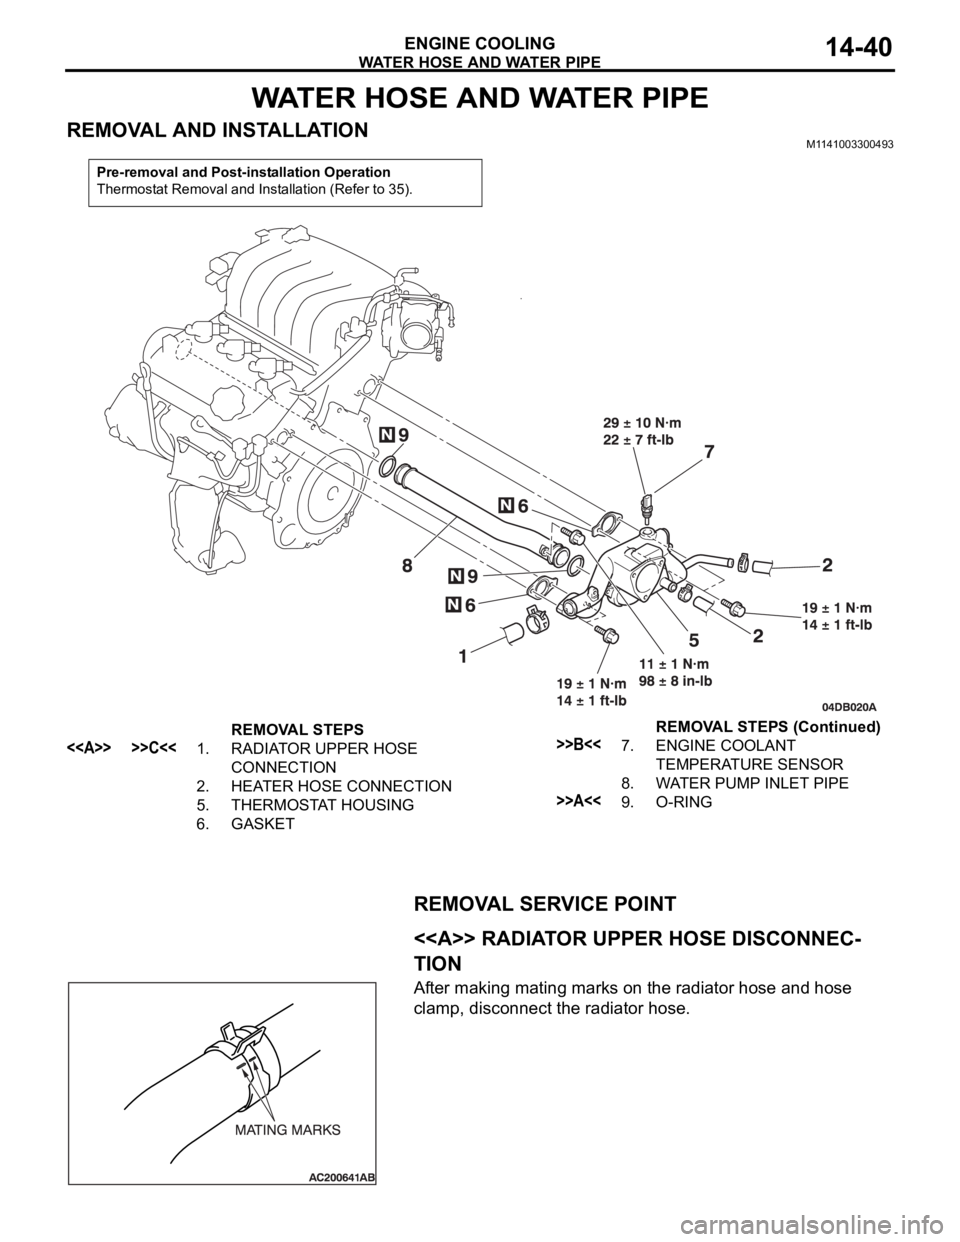 MITSUBISHI 380 2005 Service Manual WATER HOSE AND WATER PIPE
ENGINE COOLING14-40
WATER HOSE AND WATER PIPE
REMOVAL AND INSTALLATIONM1141003300493
REMOVAL SERVICE POINT
.
<<A>> RADIATOR UPPER HOSE DISCONNEC-
TION
After making mating mar